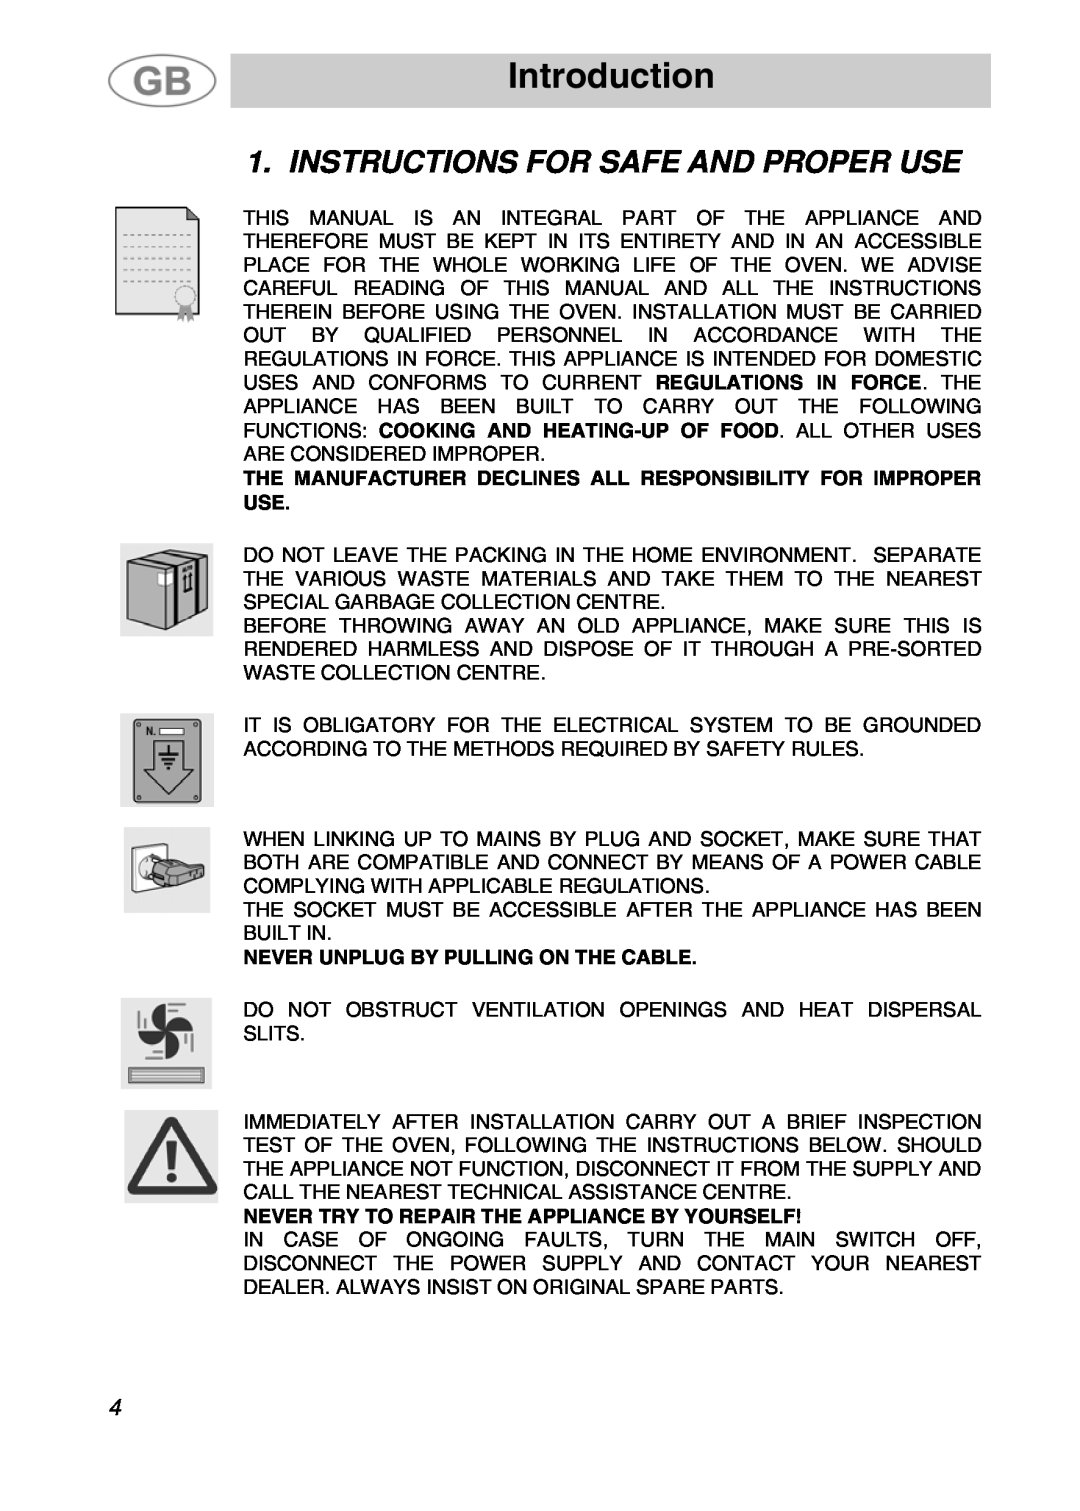 Smeg JRP30GIBB manual Introduction, Instructions For Safe And Proper Use, Never Unplug By Pulling On The Cable 